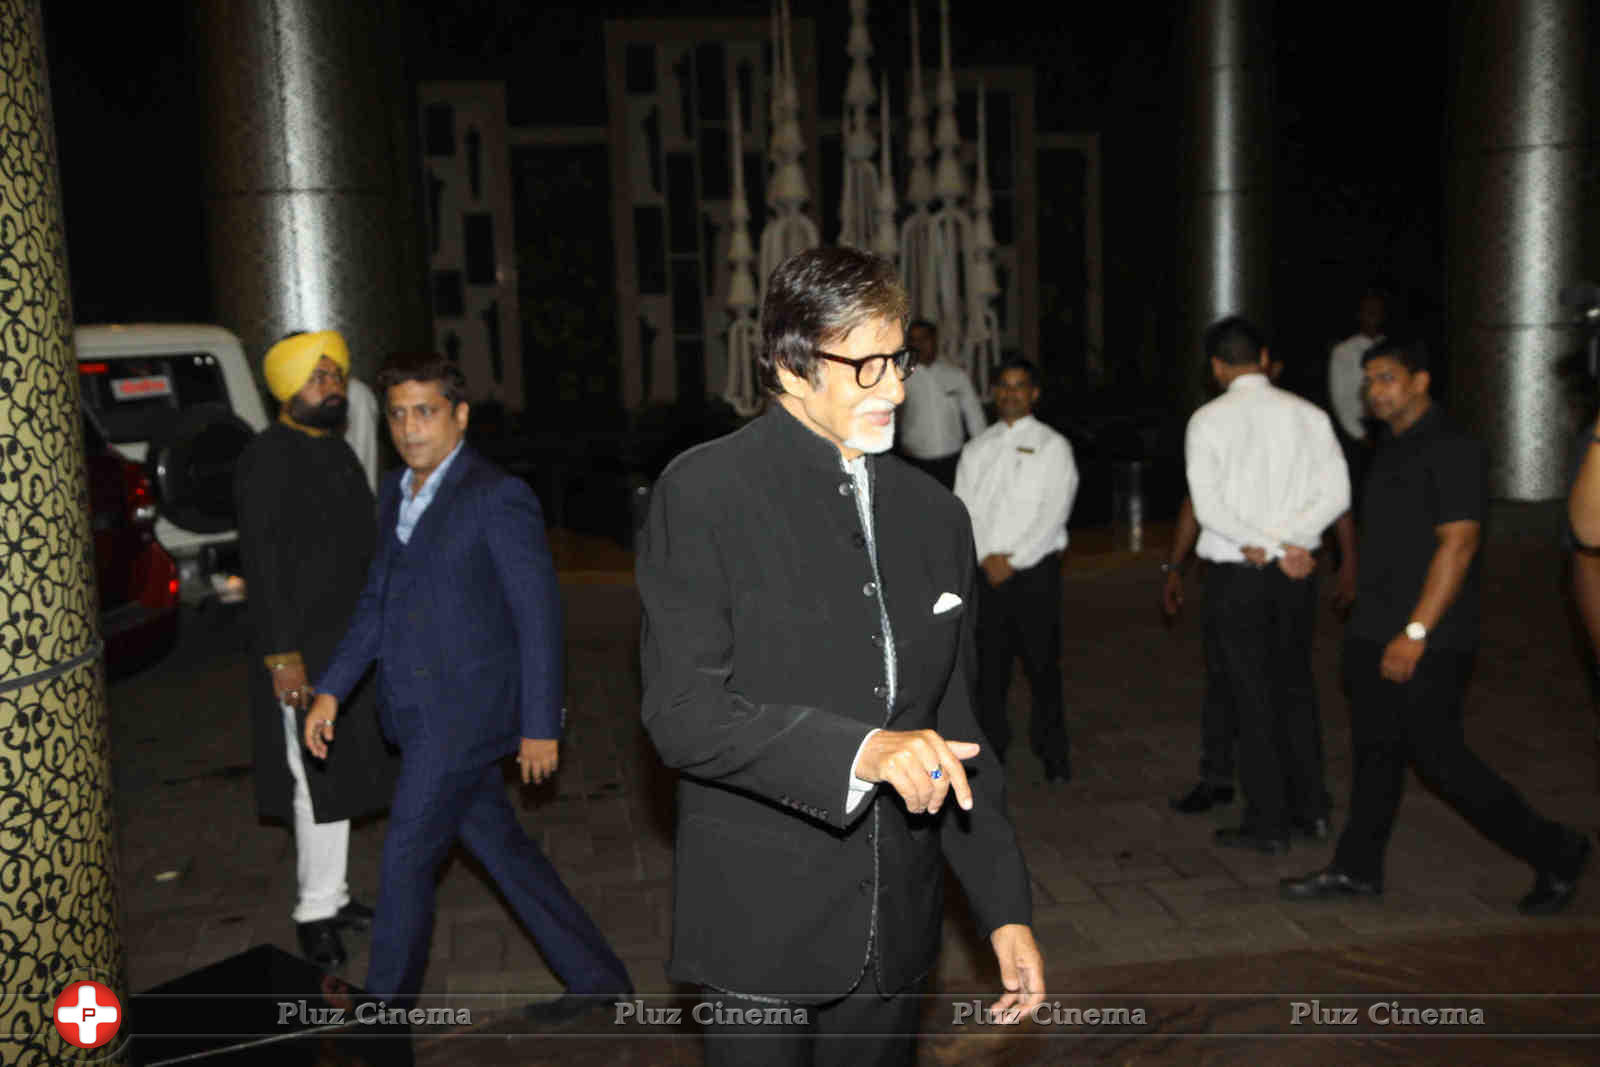 Wedding Reception of Shahid Kapoor and Mira Rajput Photos | Picture 1061584